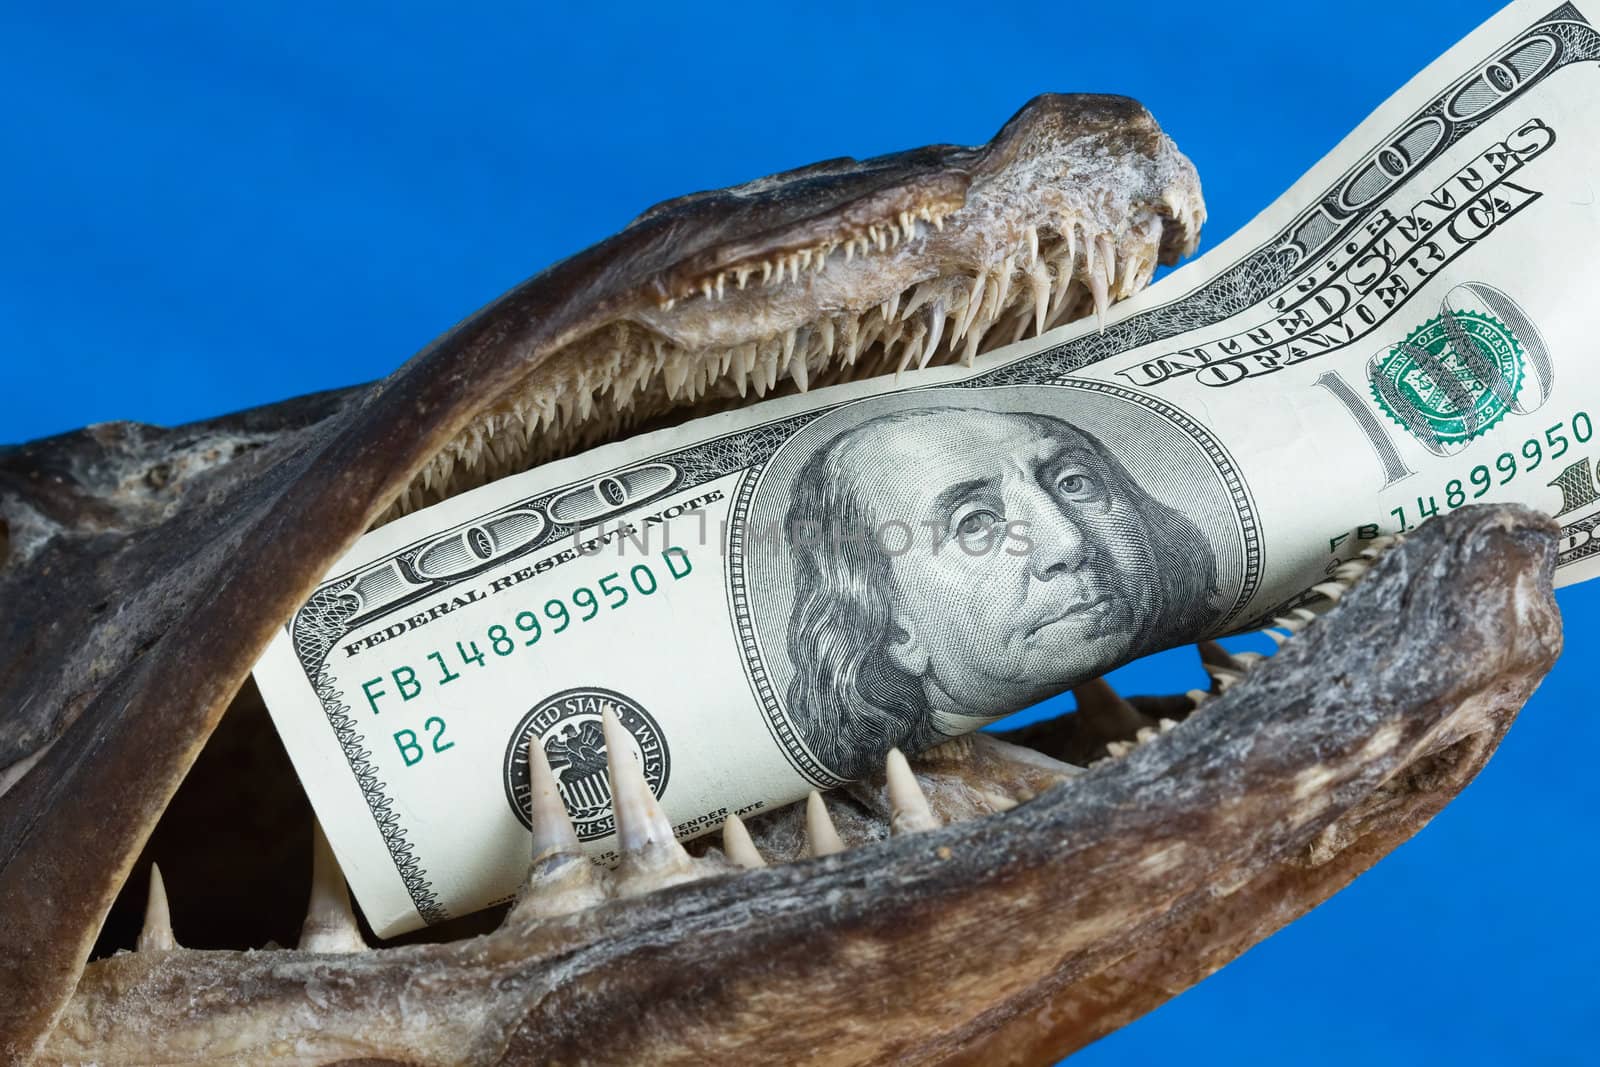 The fish mouth holds dollar on blue background